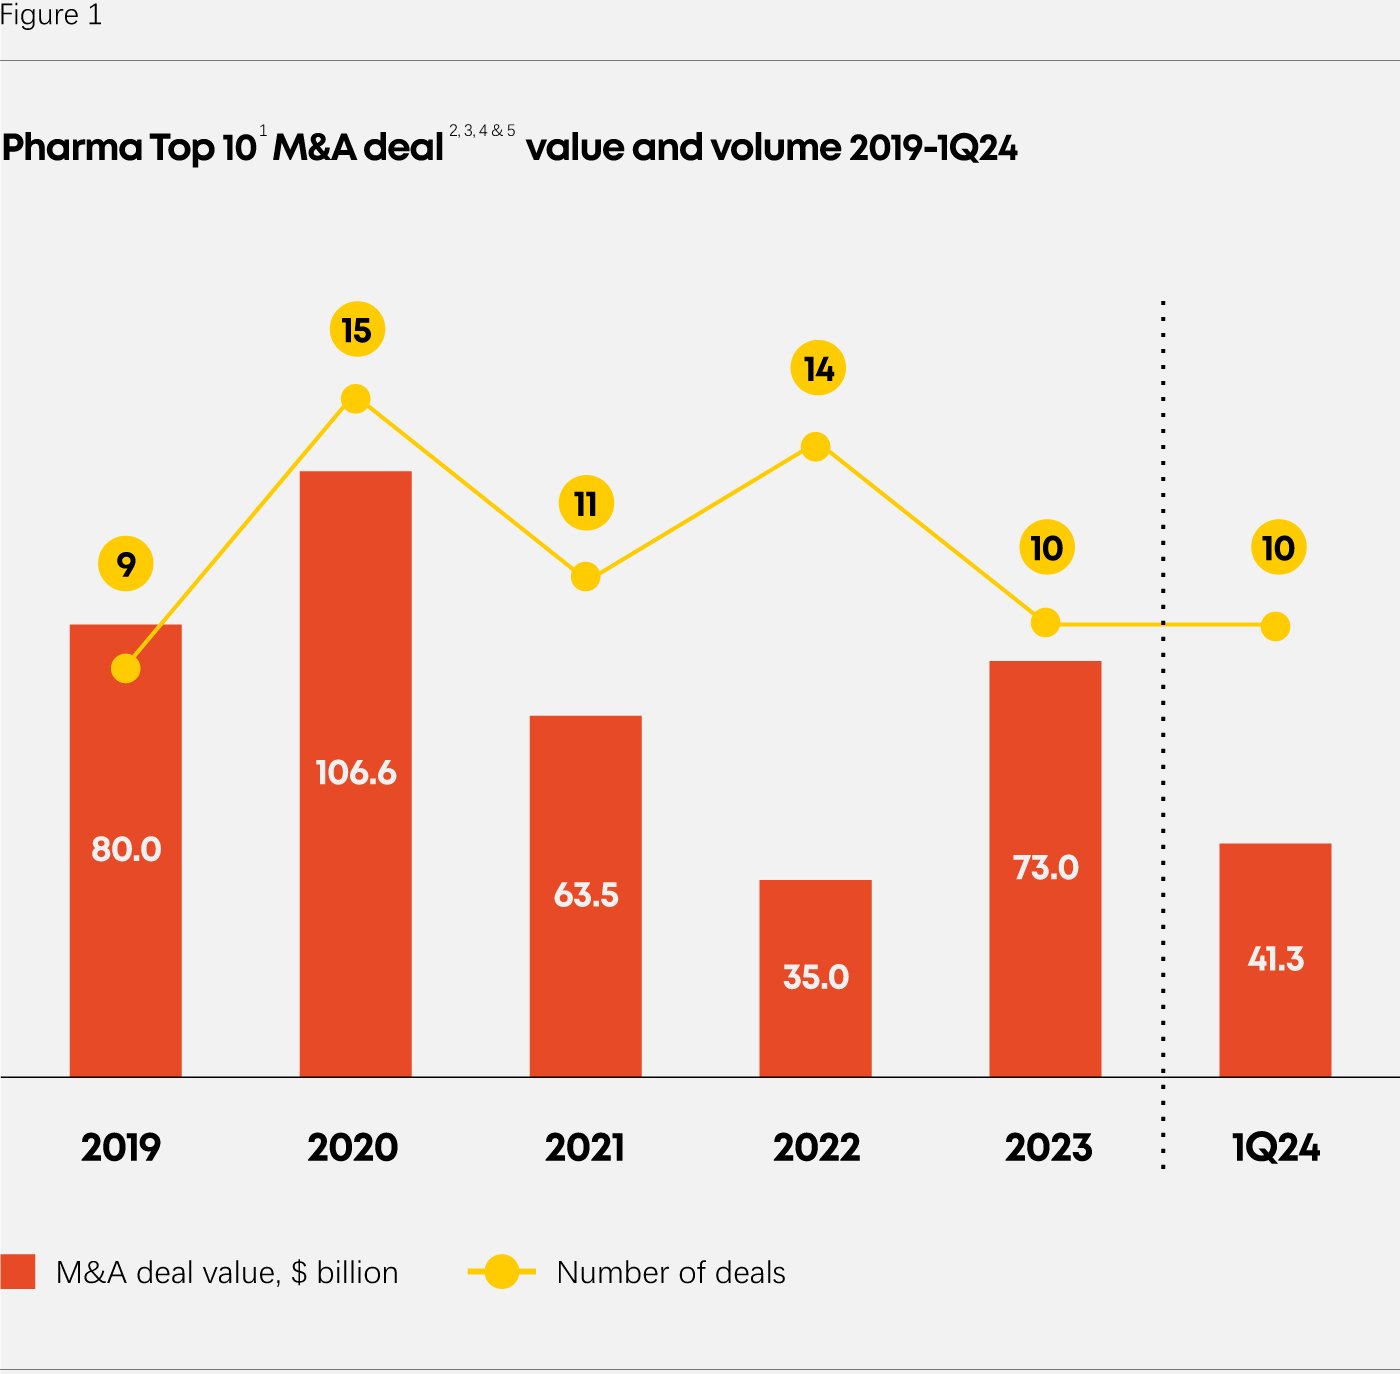 Pharma Top 10 M&A deal value and volume 2019-2024